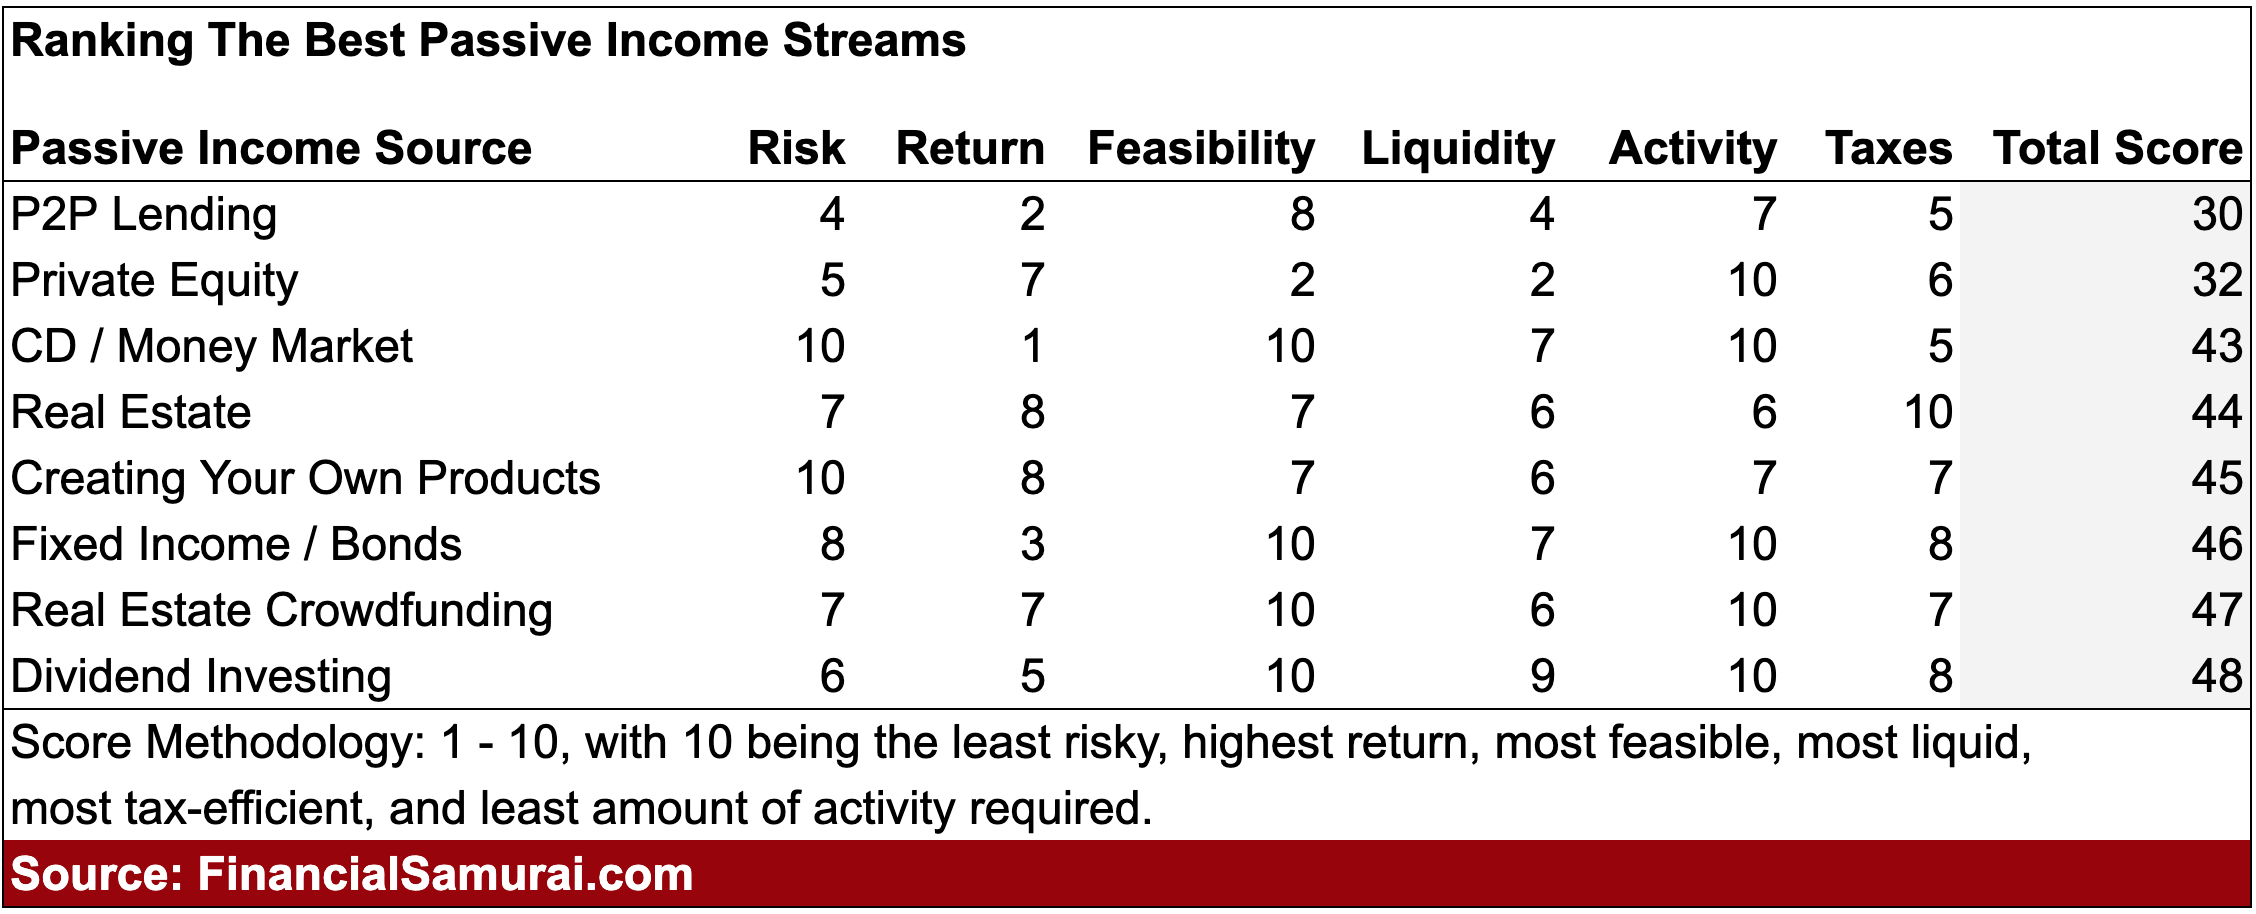 the need for liquidity is overrated due to passive income streams